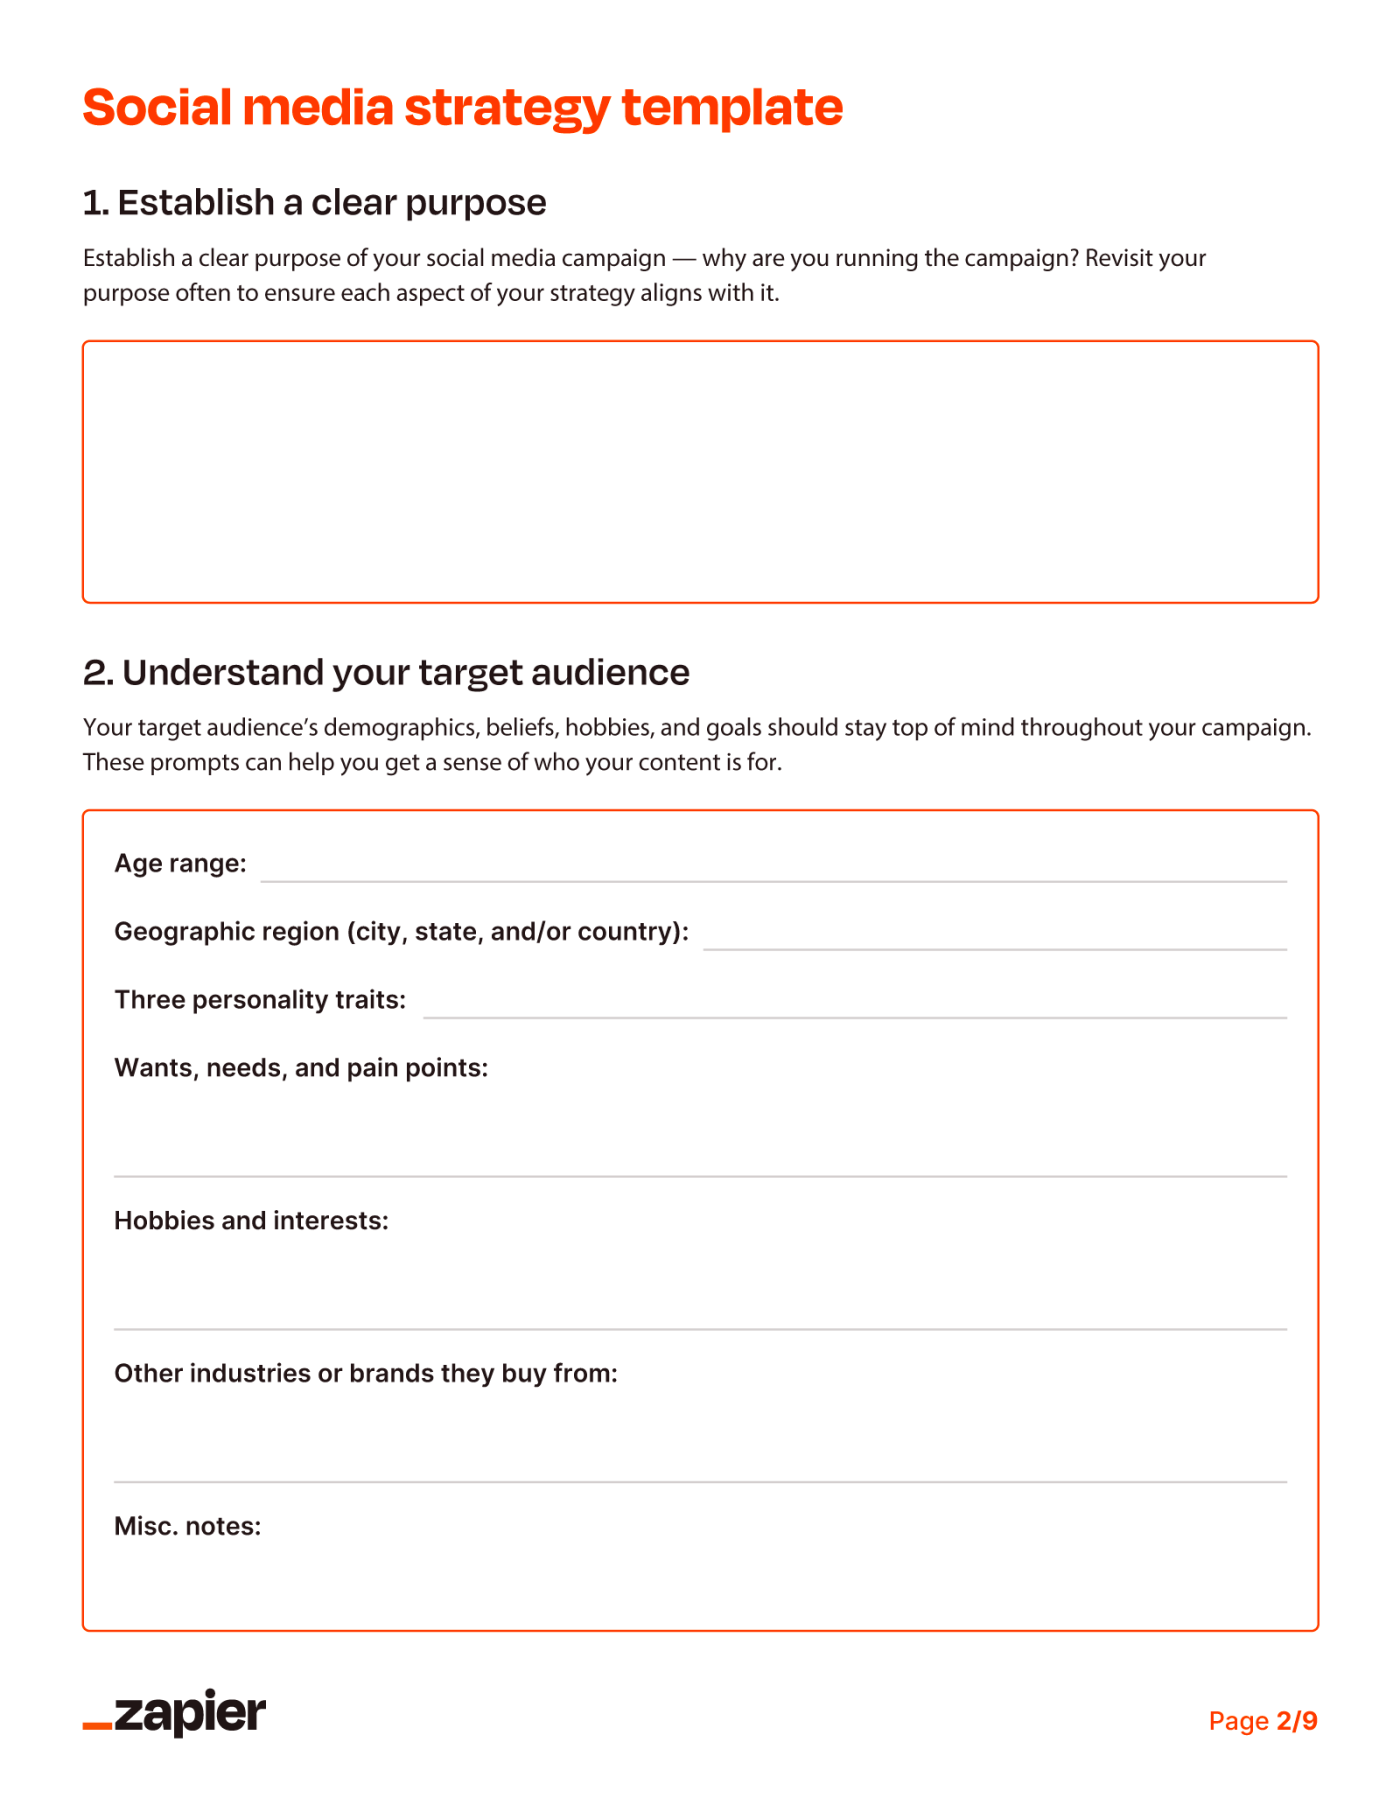 A snippet of the social media strategy template that can be downloaded via the button below 